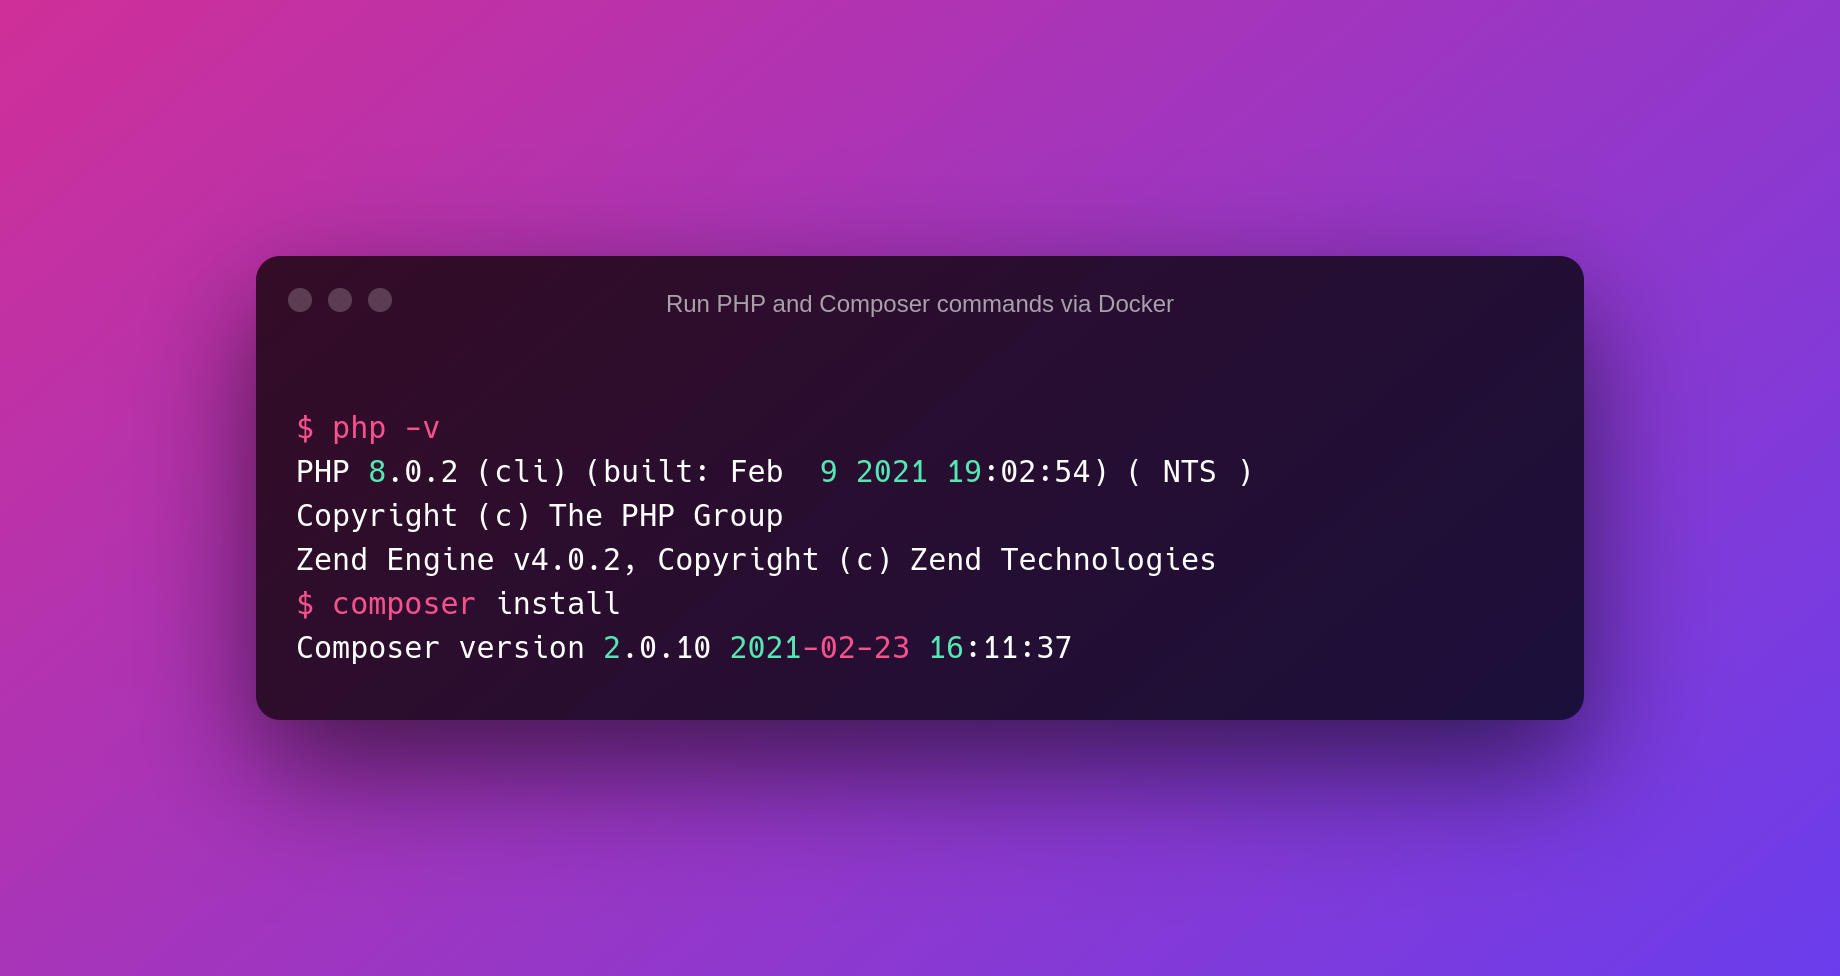 Run PHP and Composer commands via Docker